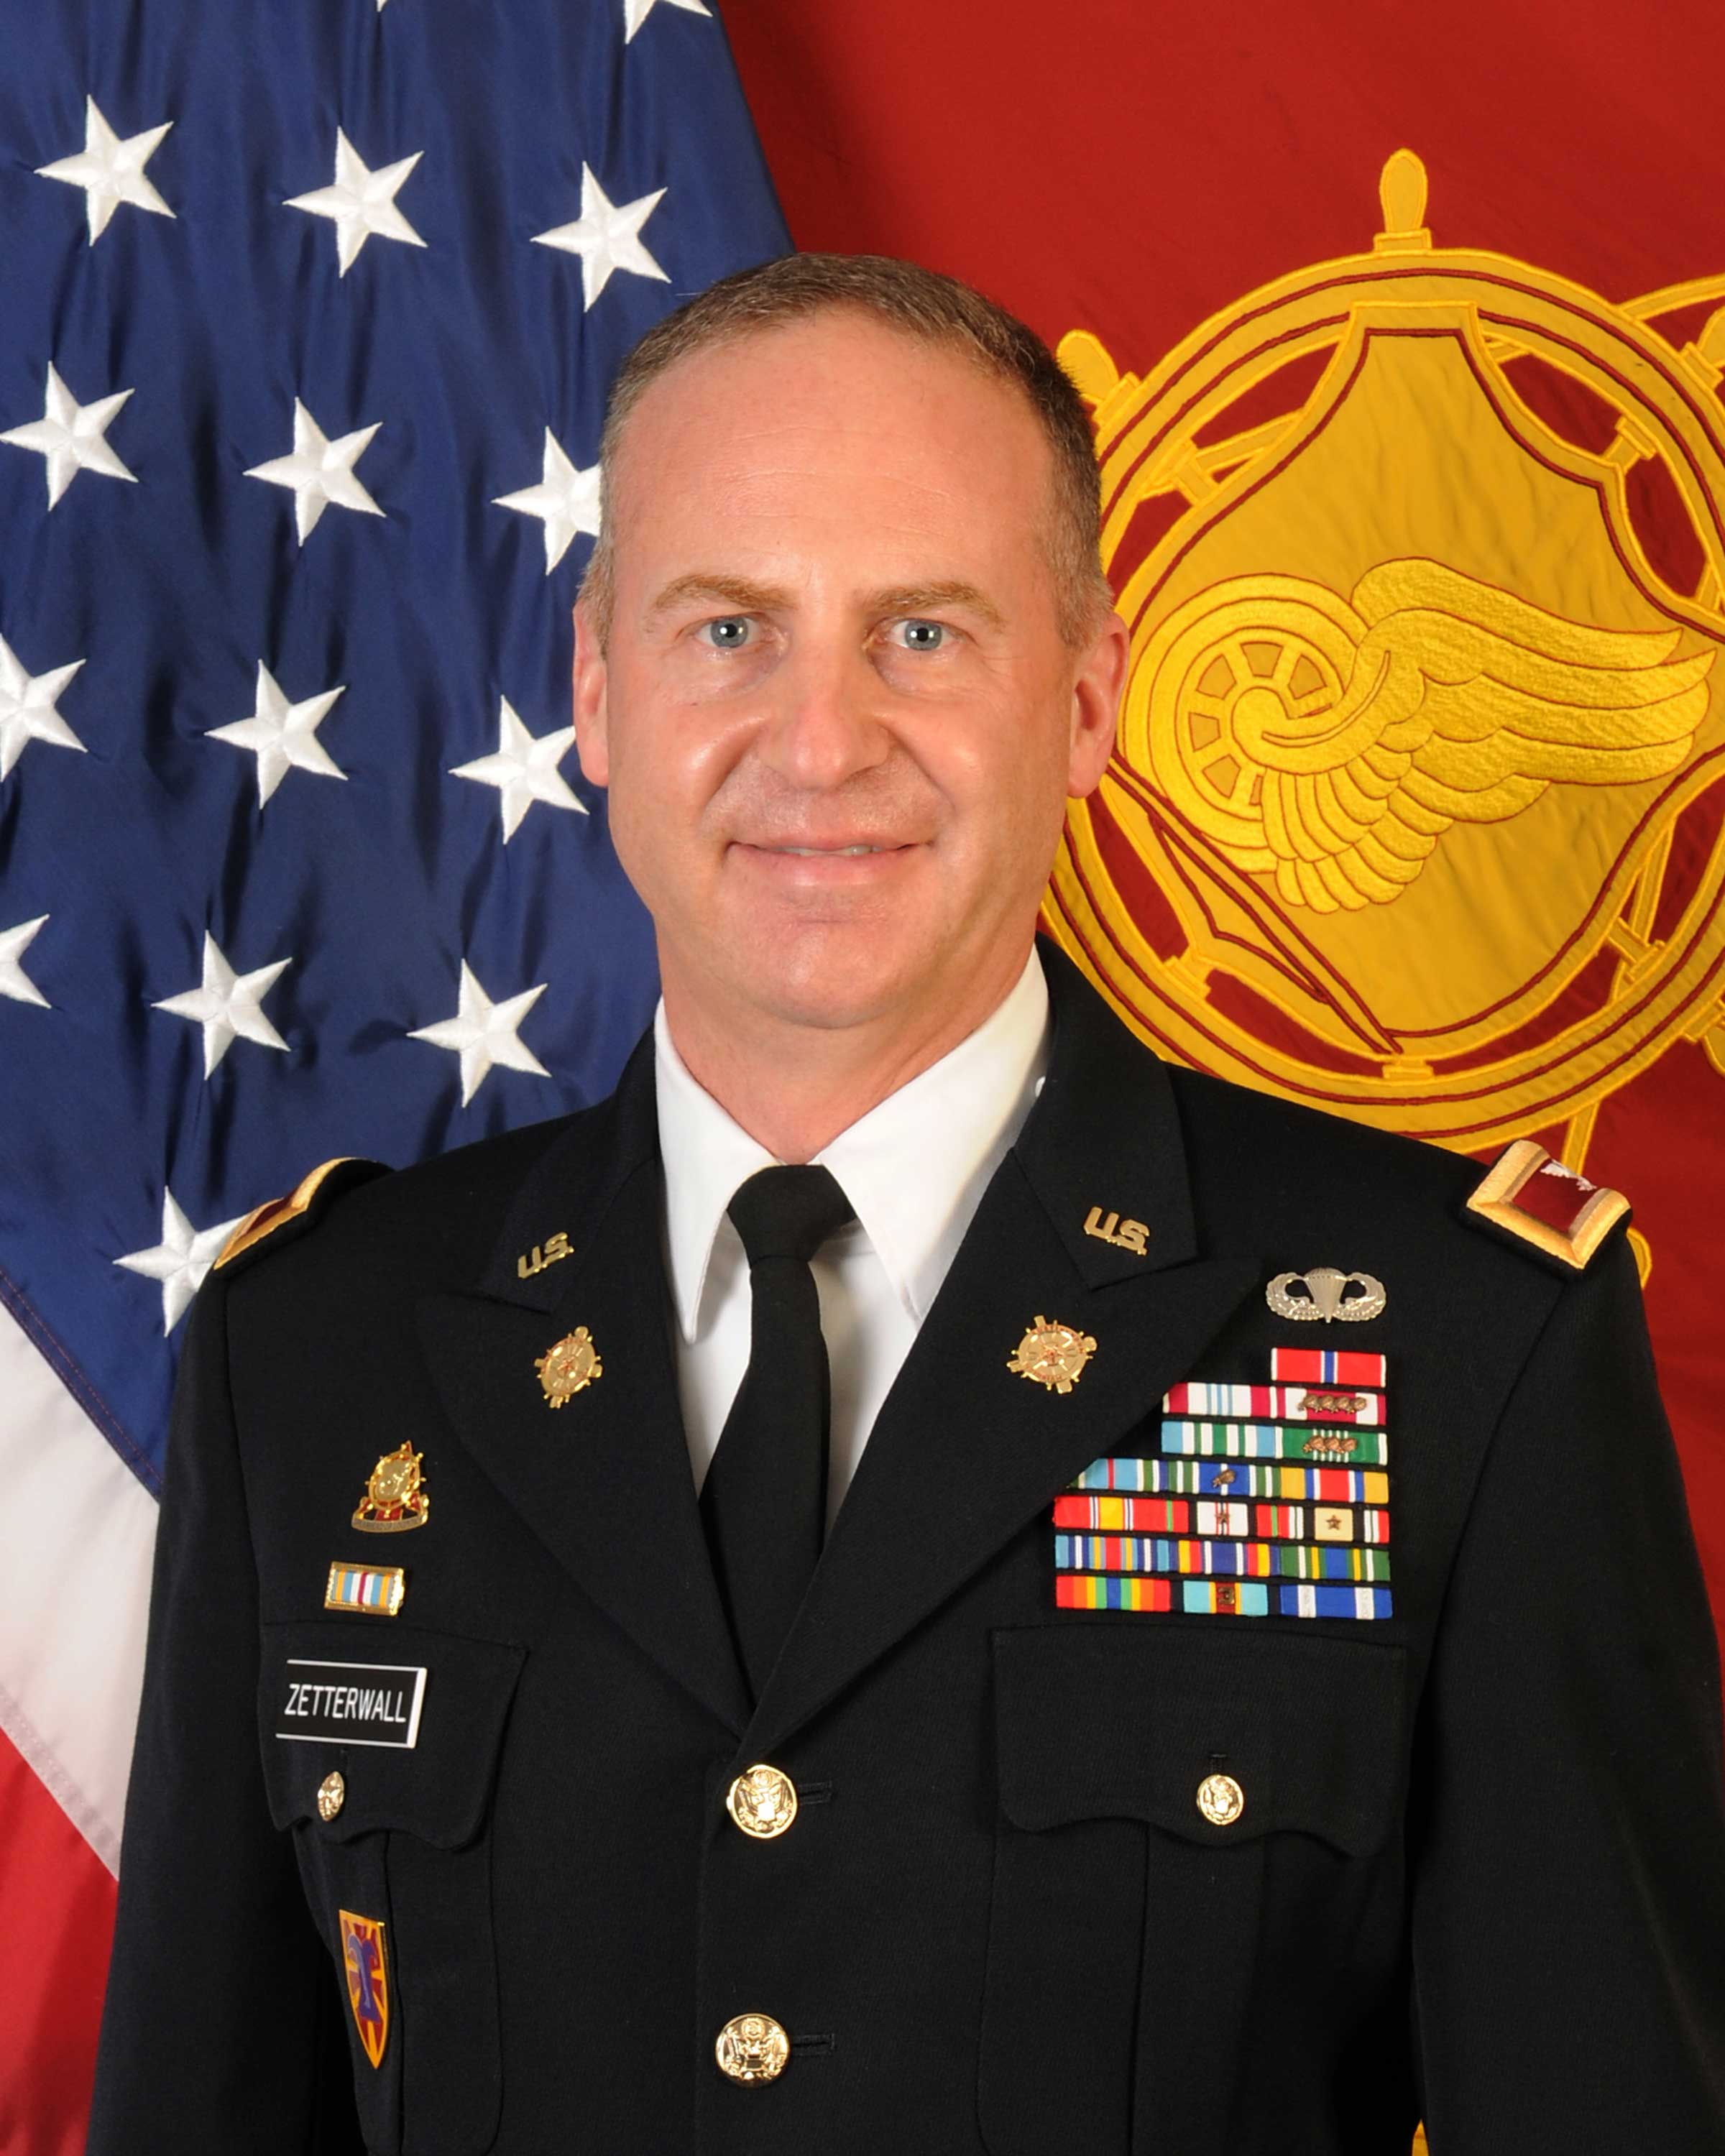 Colonel Timothy R. Zetterwall